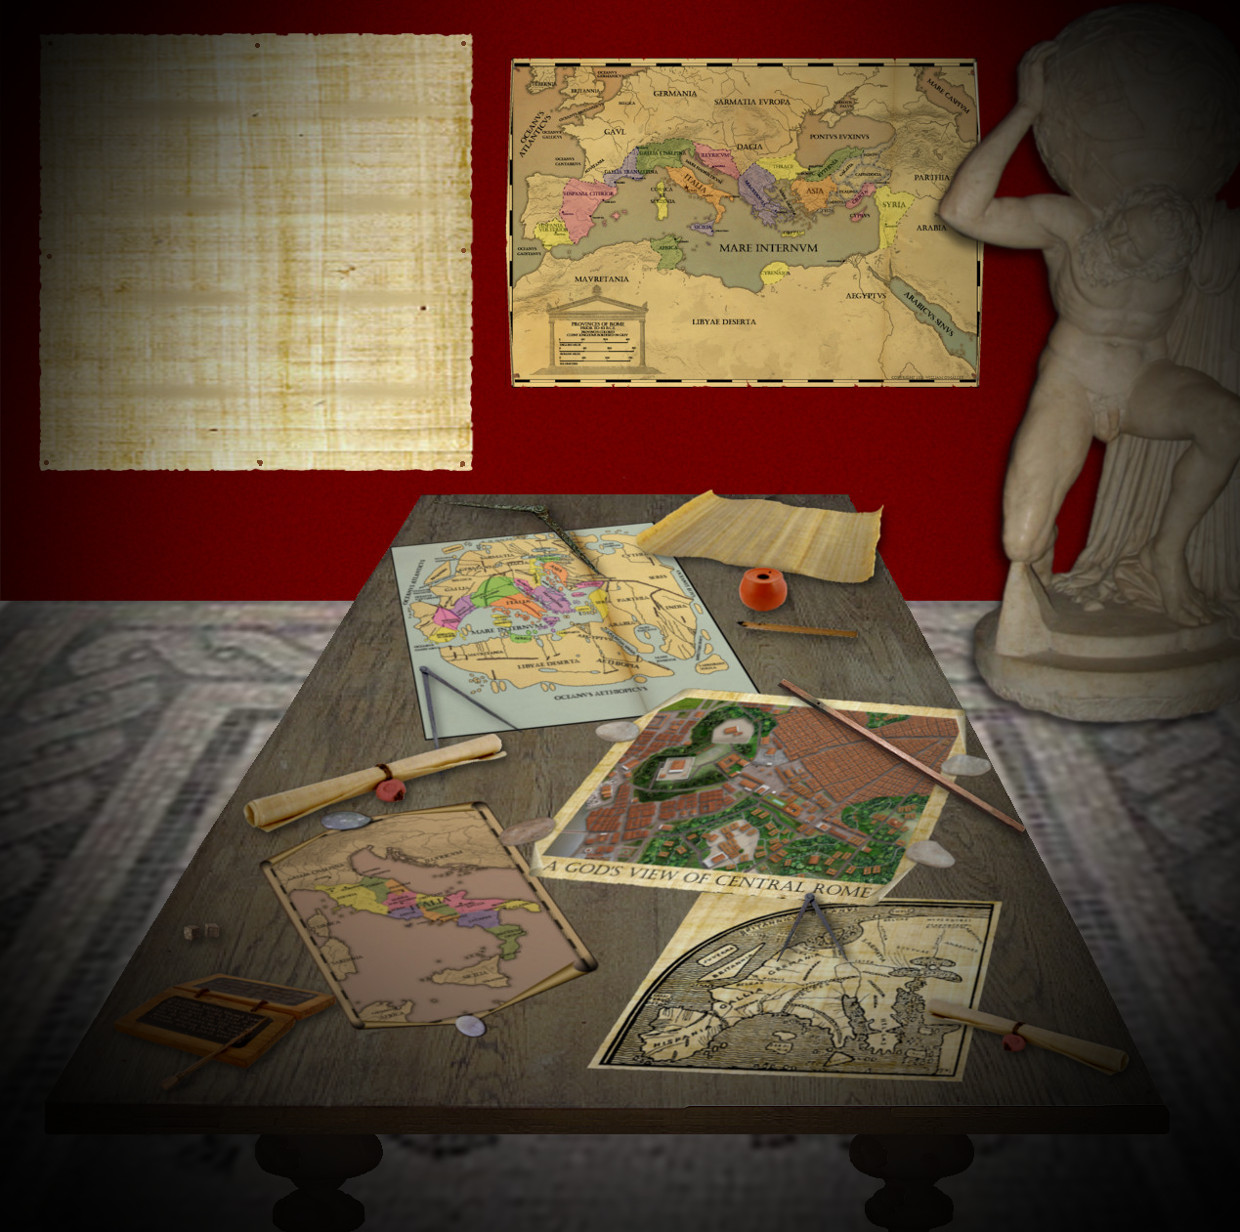 Room with various clickable maps